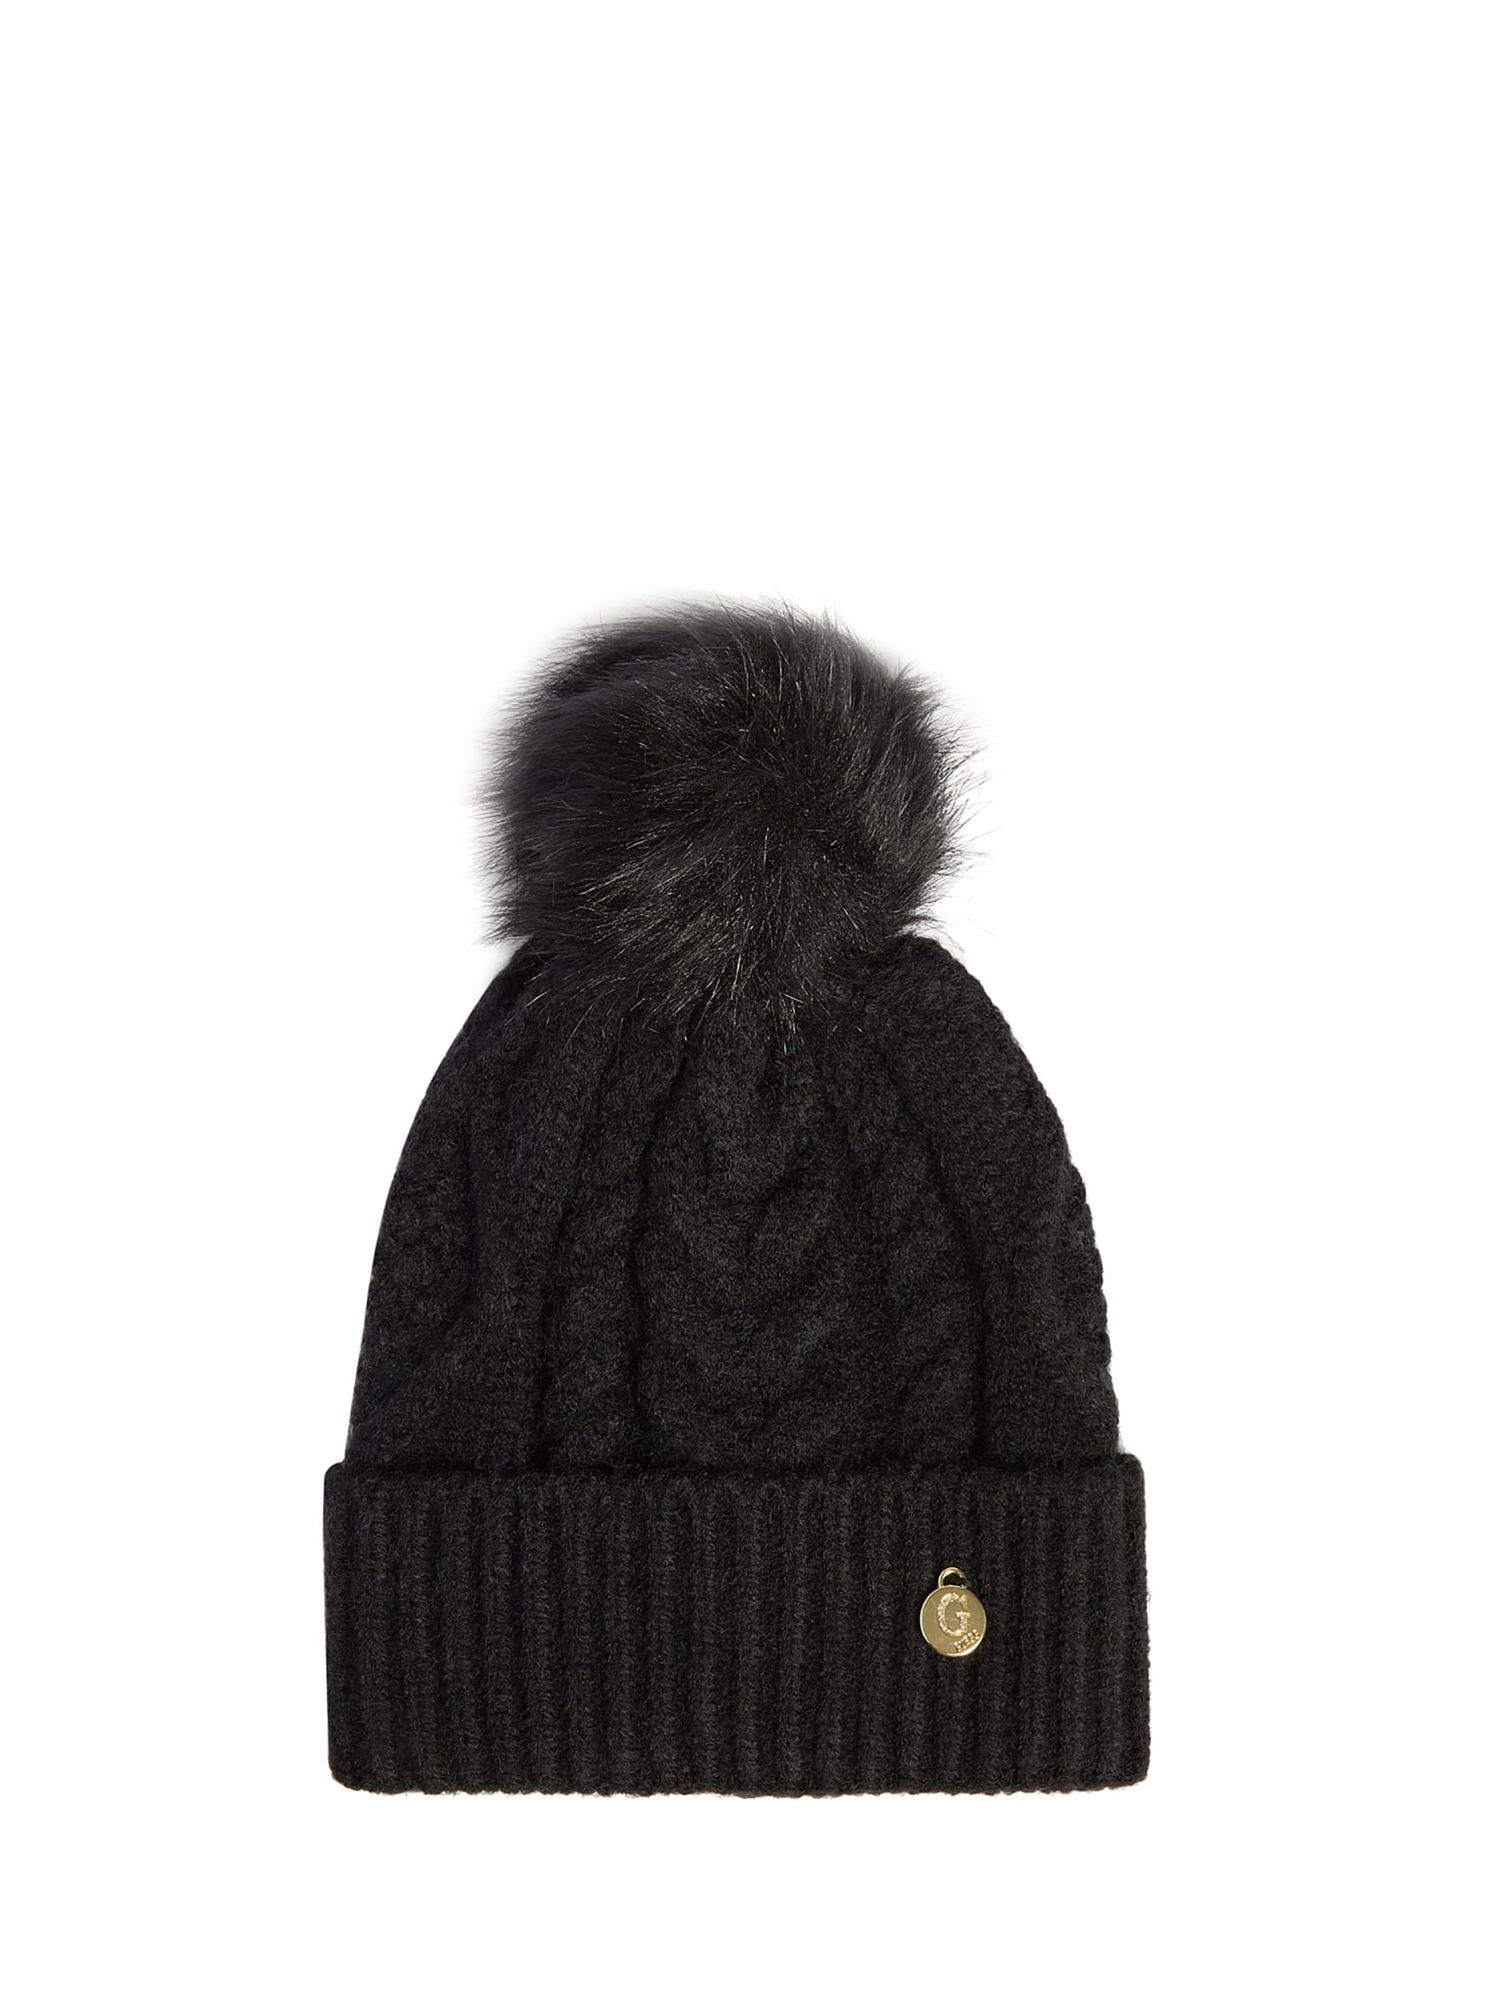 GUESS Cable Knit Bobble Hat, Black at John Lewis & Partners